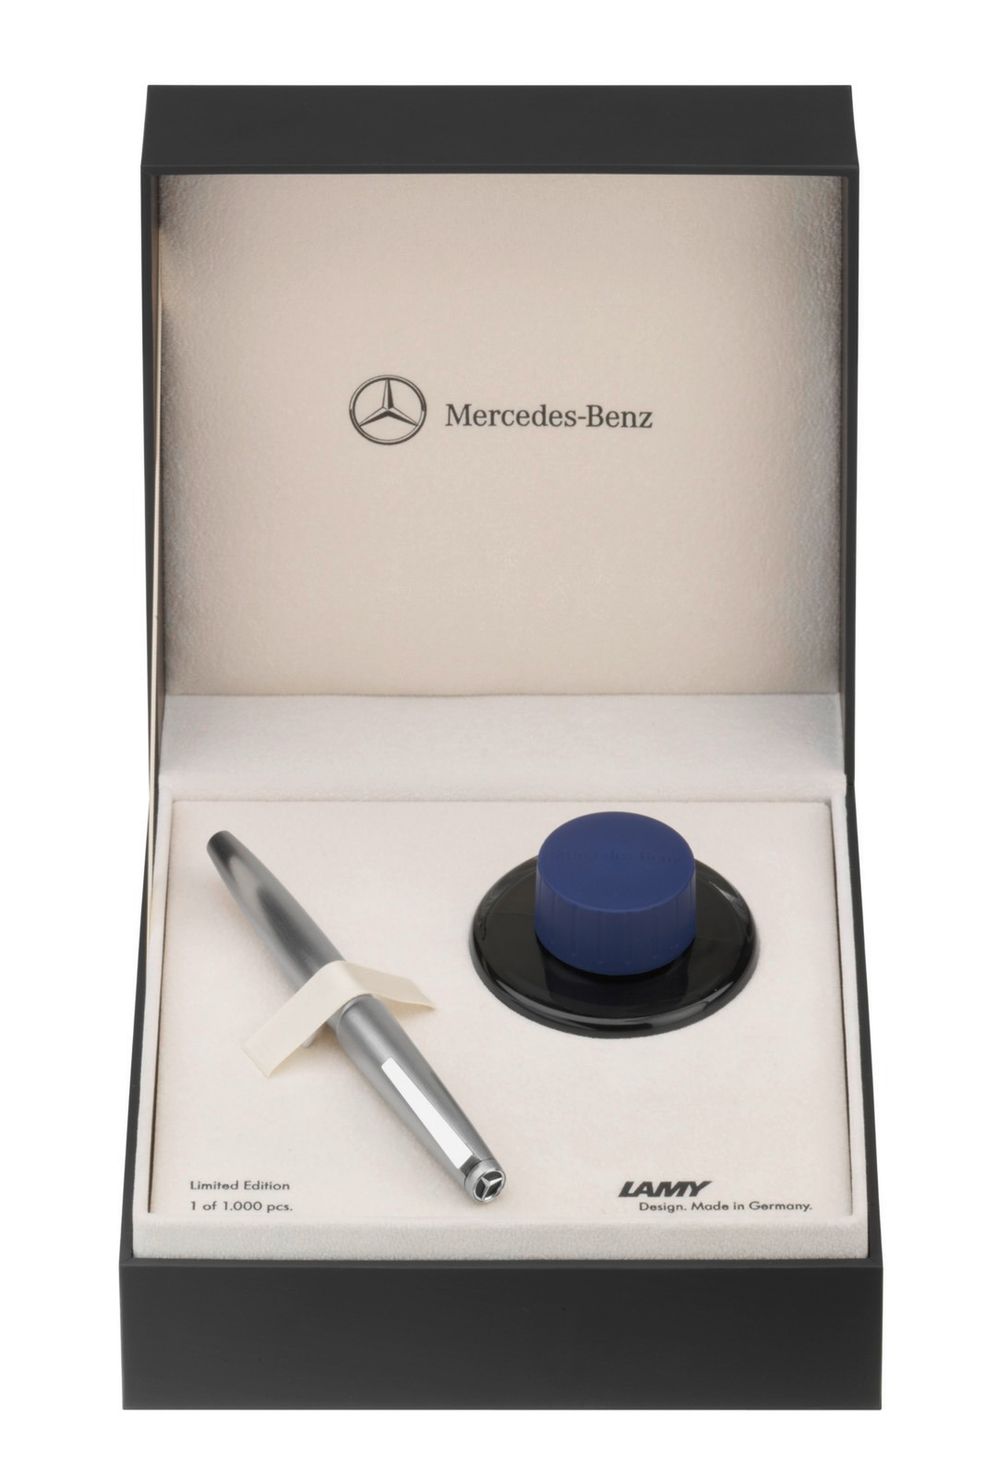 BRAND NEW GENUINE MERCEDES-BENZ ROLLERBALL PEN BOXED 